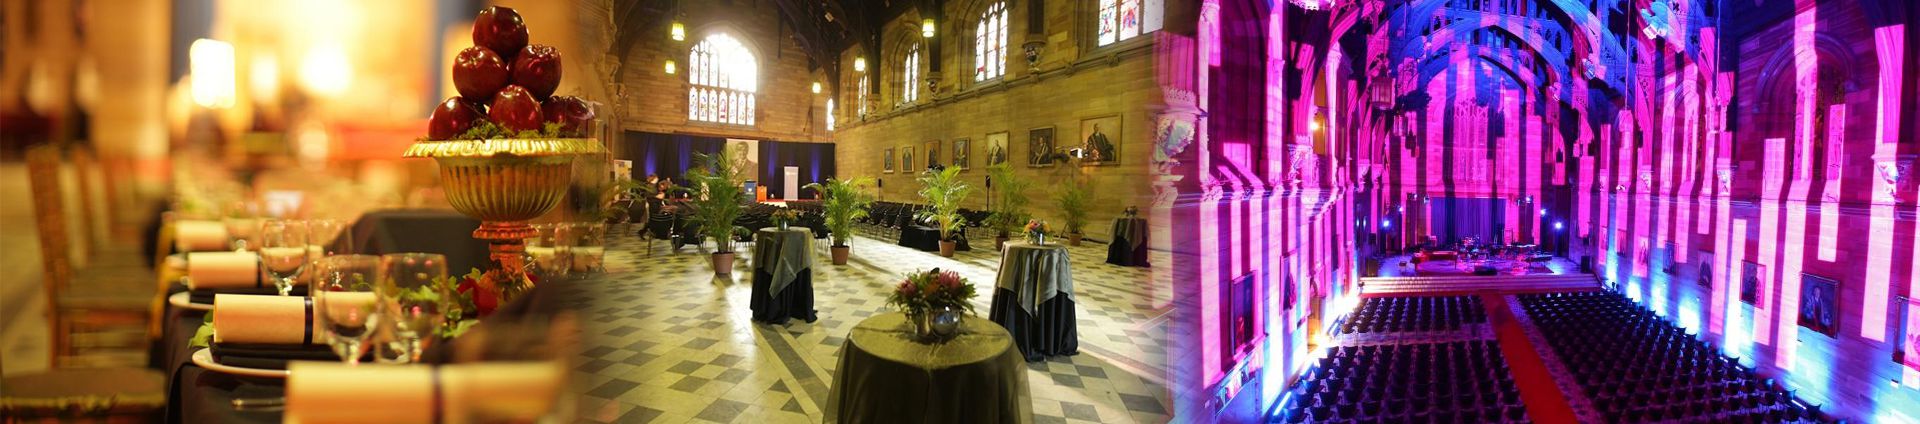 Great Hall - University of Sydney function Venues